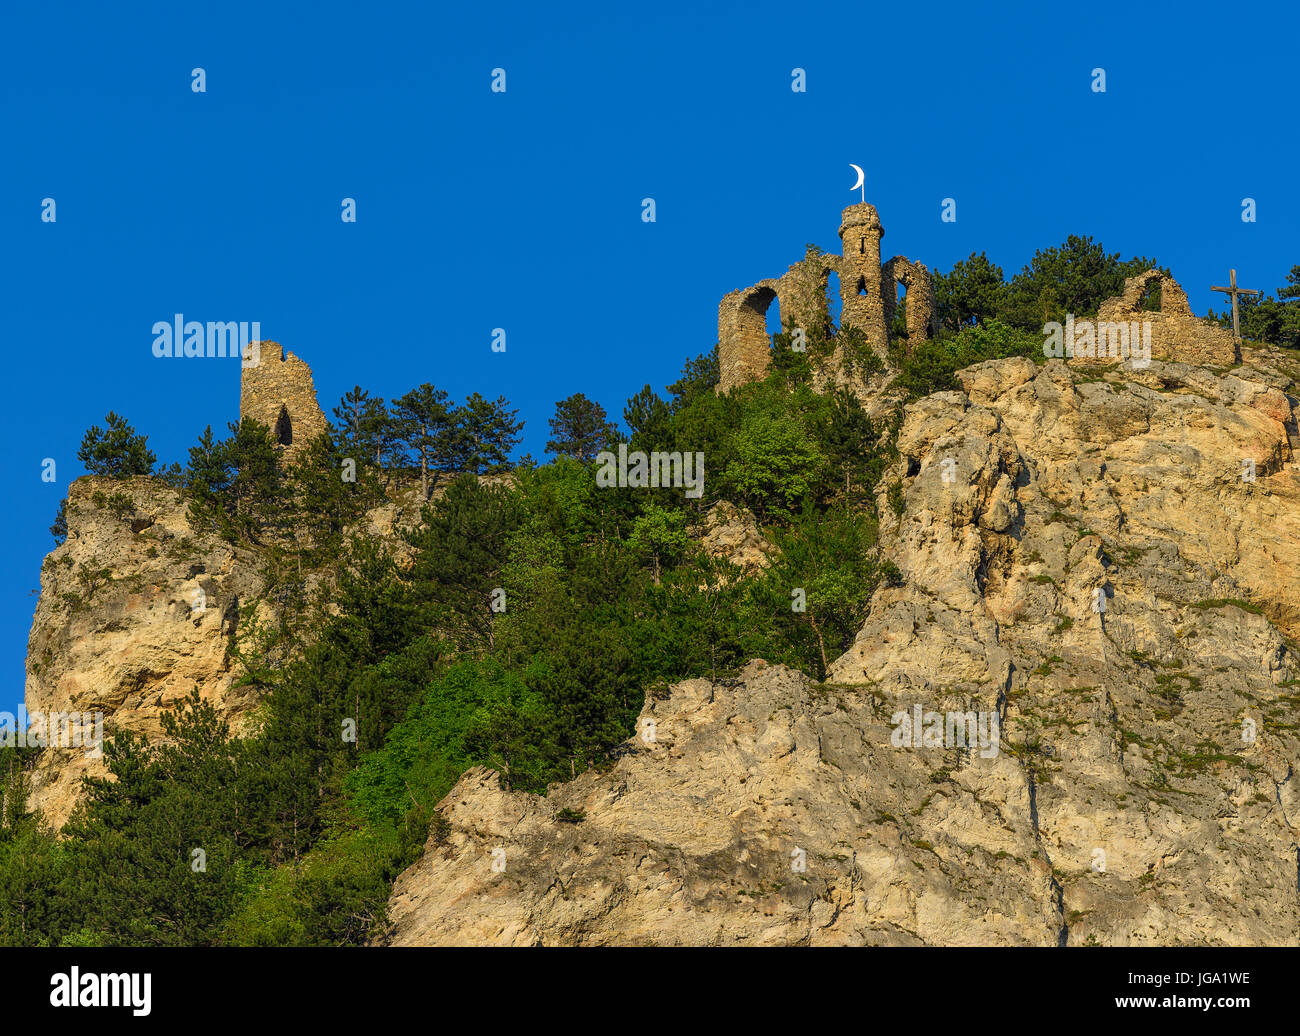 Outdoor color image of the landmark fortress ruin Tuerkensturz in Seebenstein, Austria, Europe, which is located in a nature reserve, recreation area Stock Photo